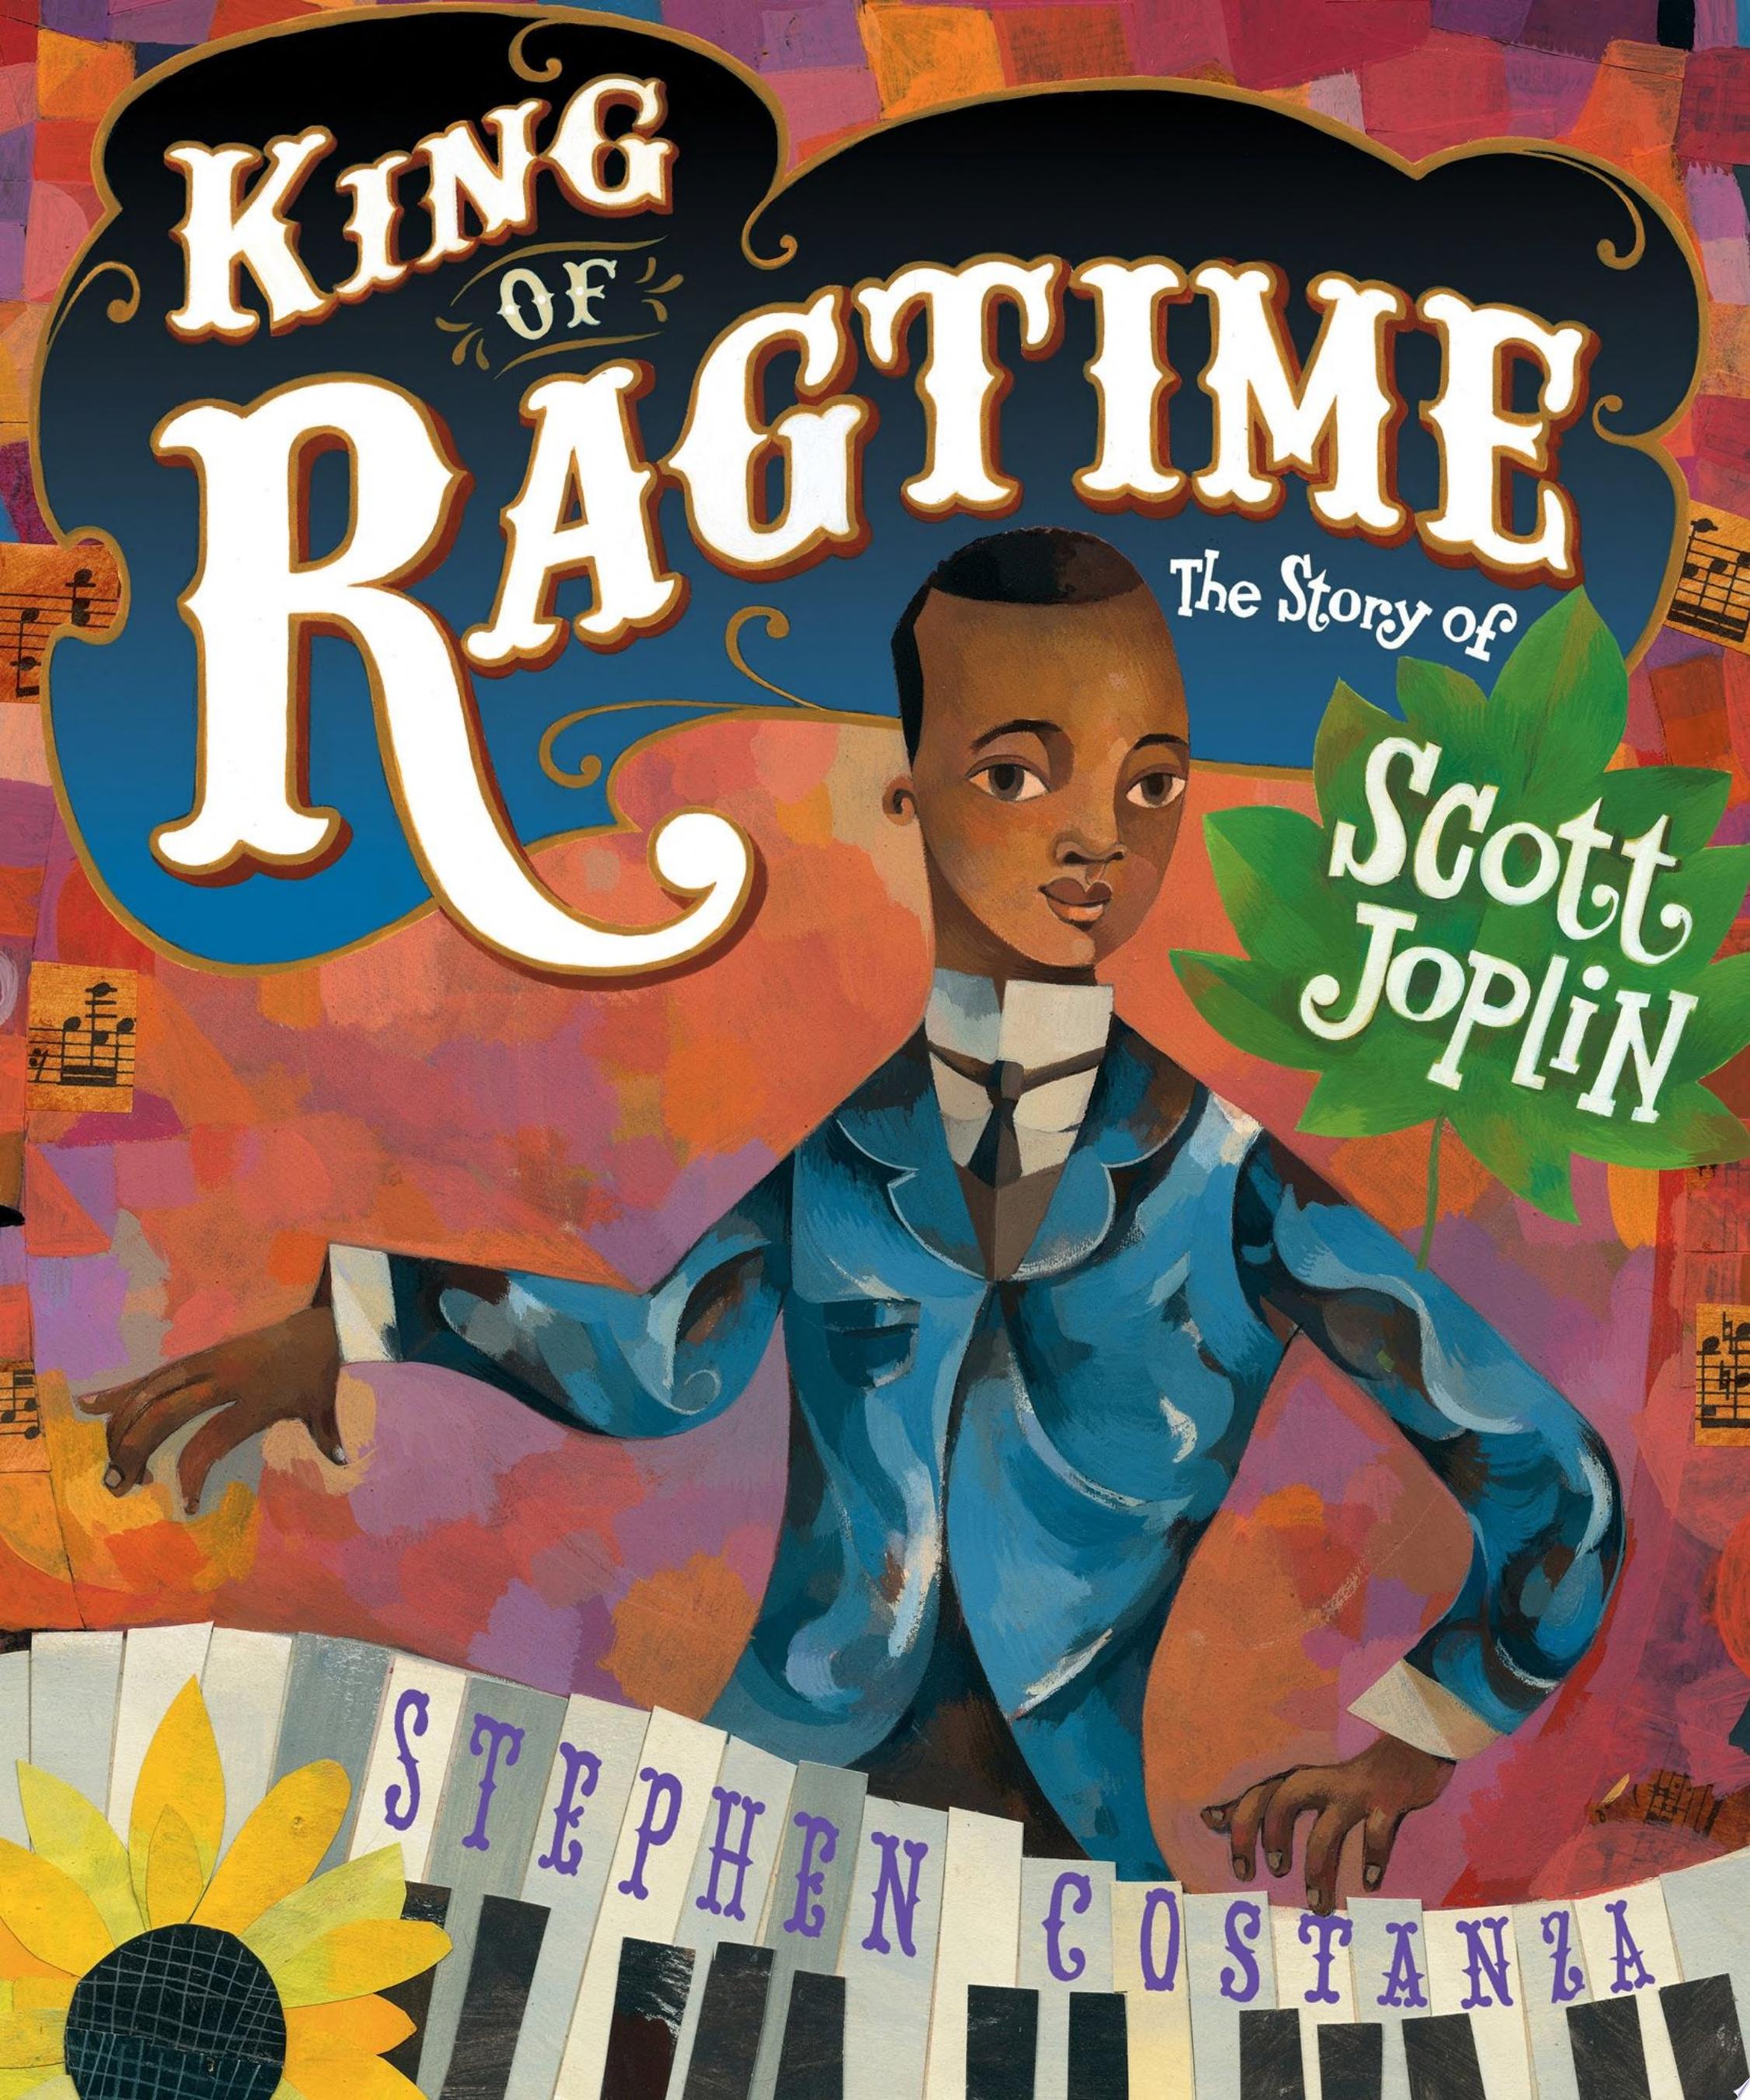 Image for "King of Ragtime"